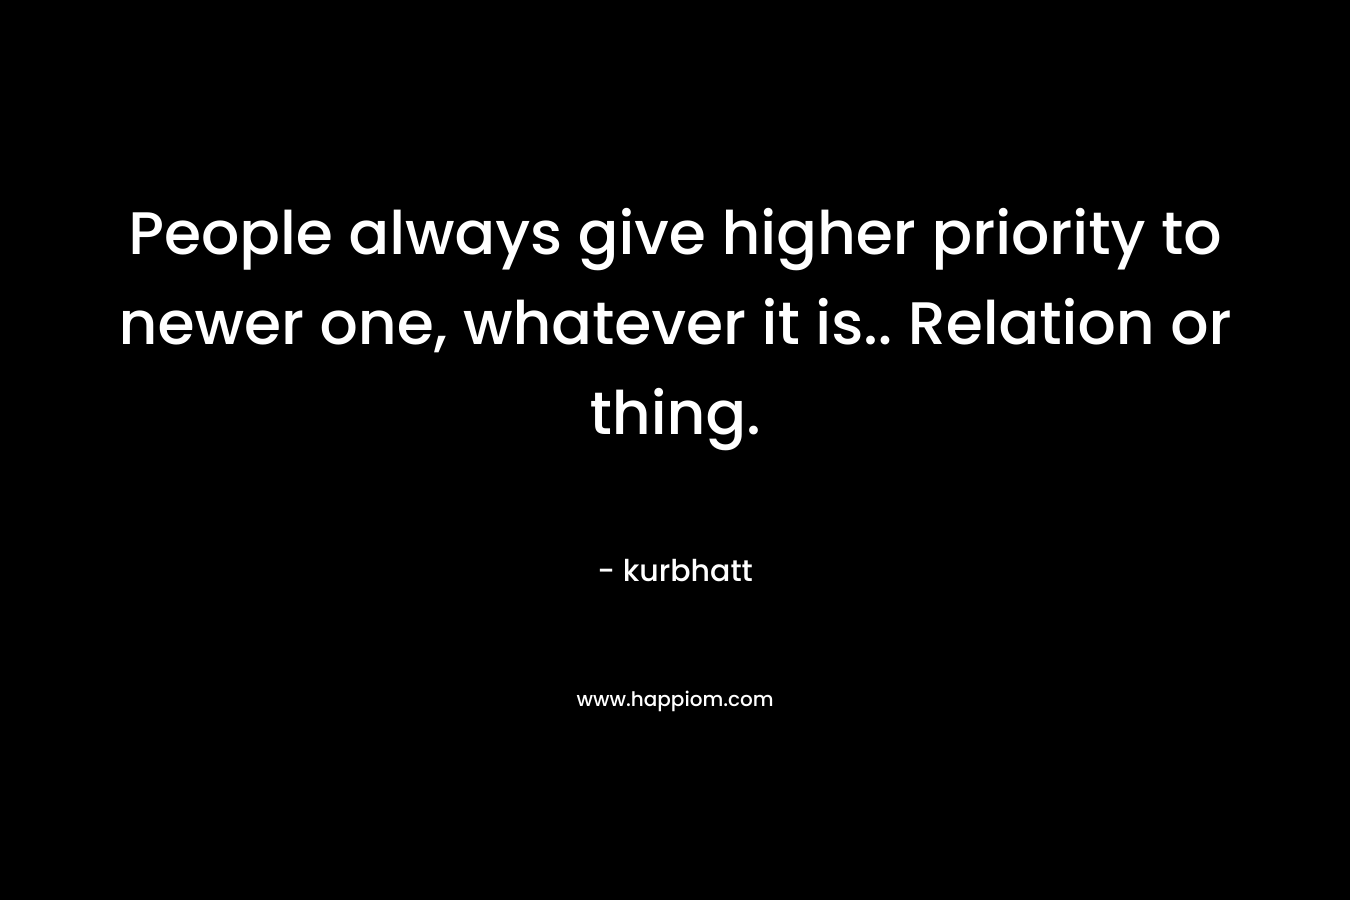 People always give higher priority to newer one, whatever it is.. Relation or thing.